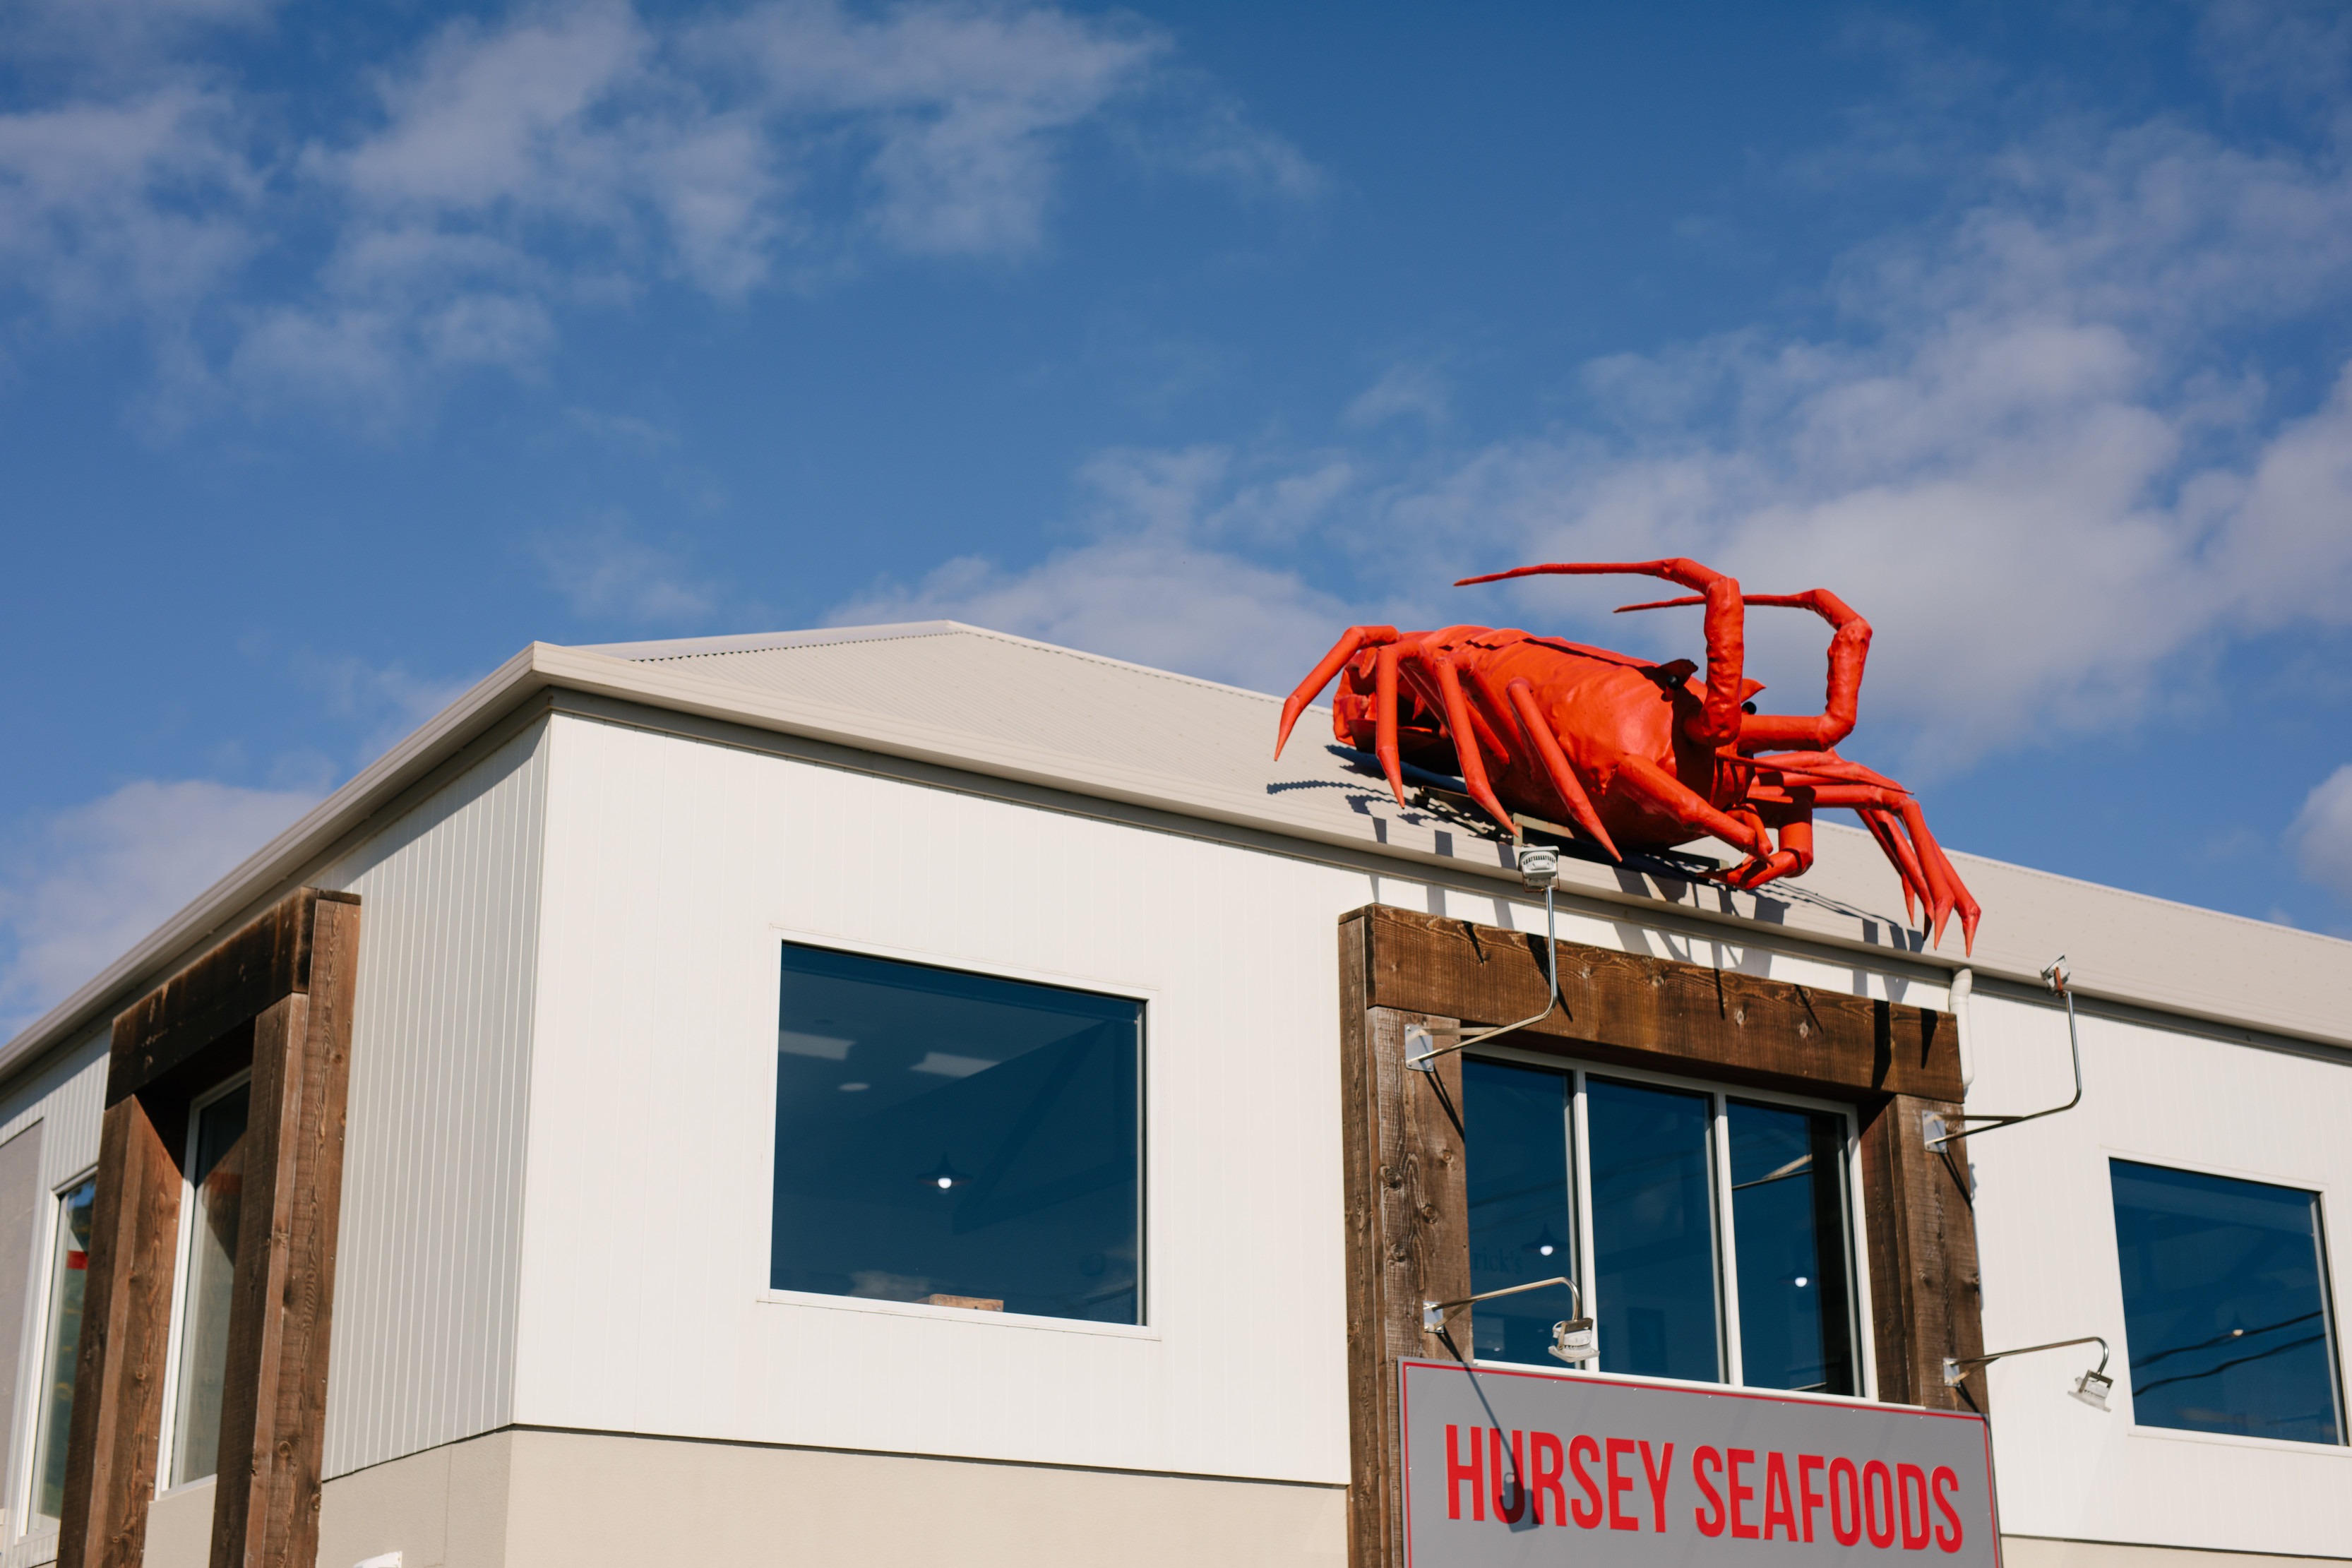 A large, manmade lobster sits on the top front of Hursey Seafoods.